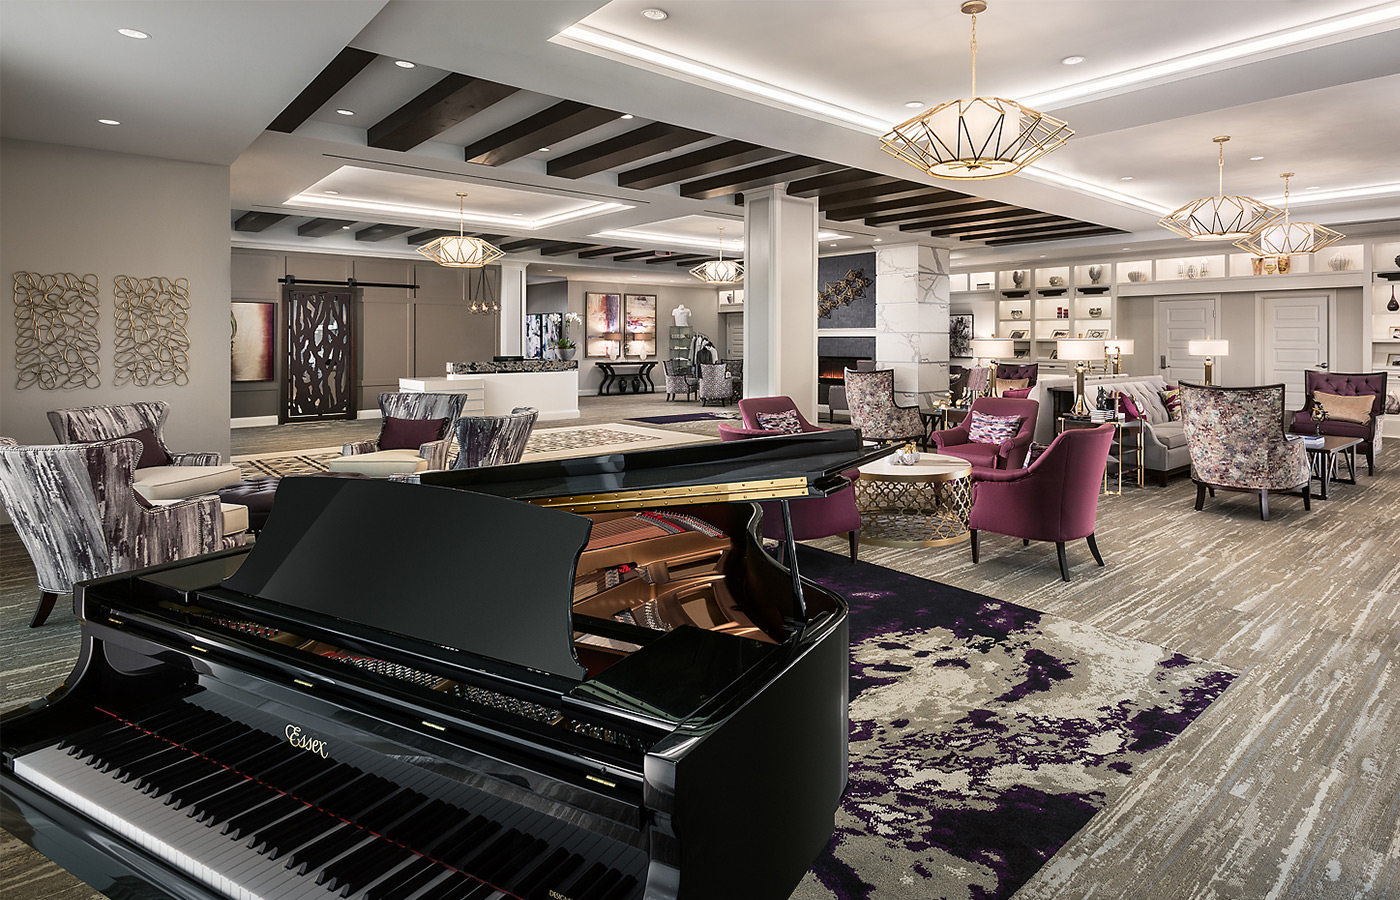 Seating lounge area with a black baby grand piano.